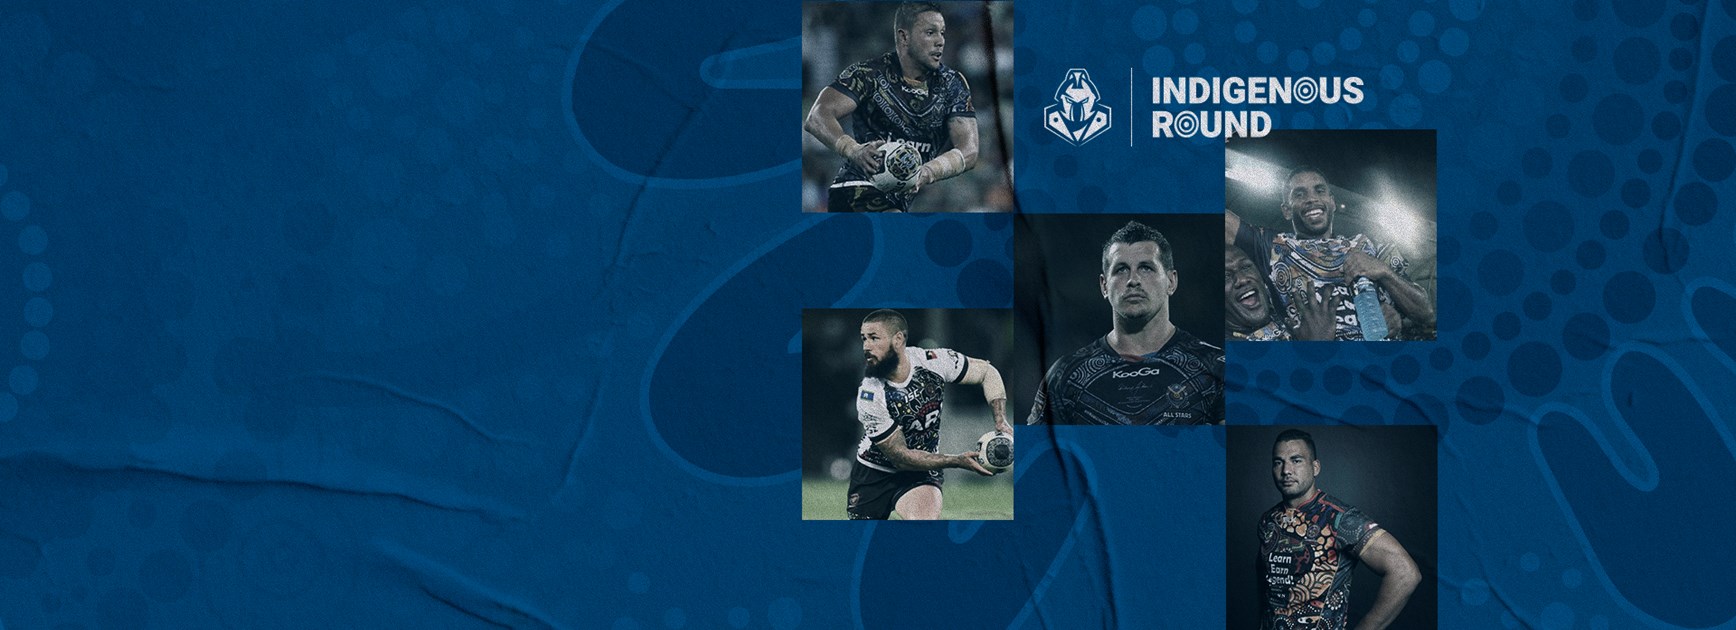 Choose who should be in the NRL Indigenous Dream Team of past 20 years